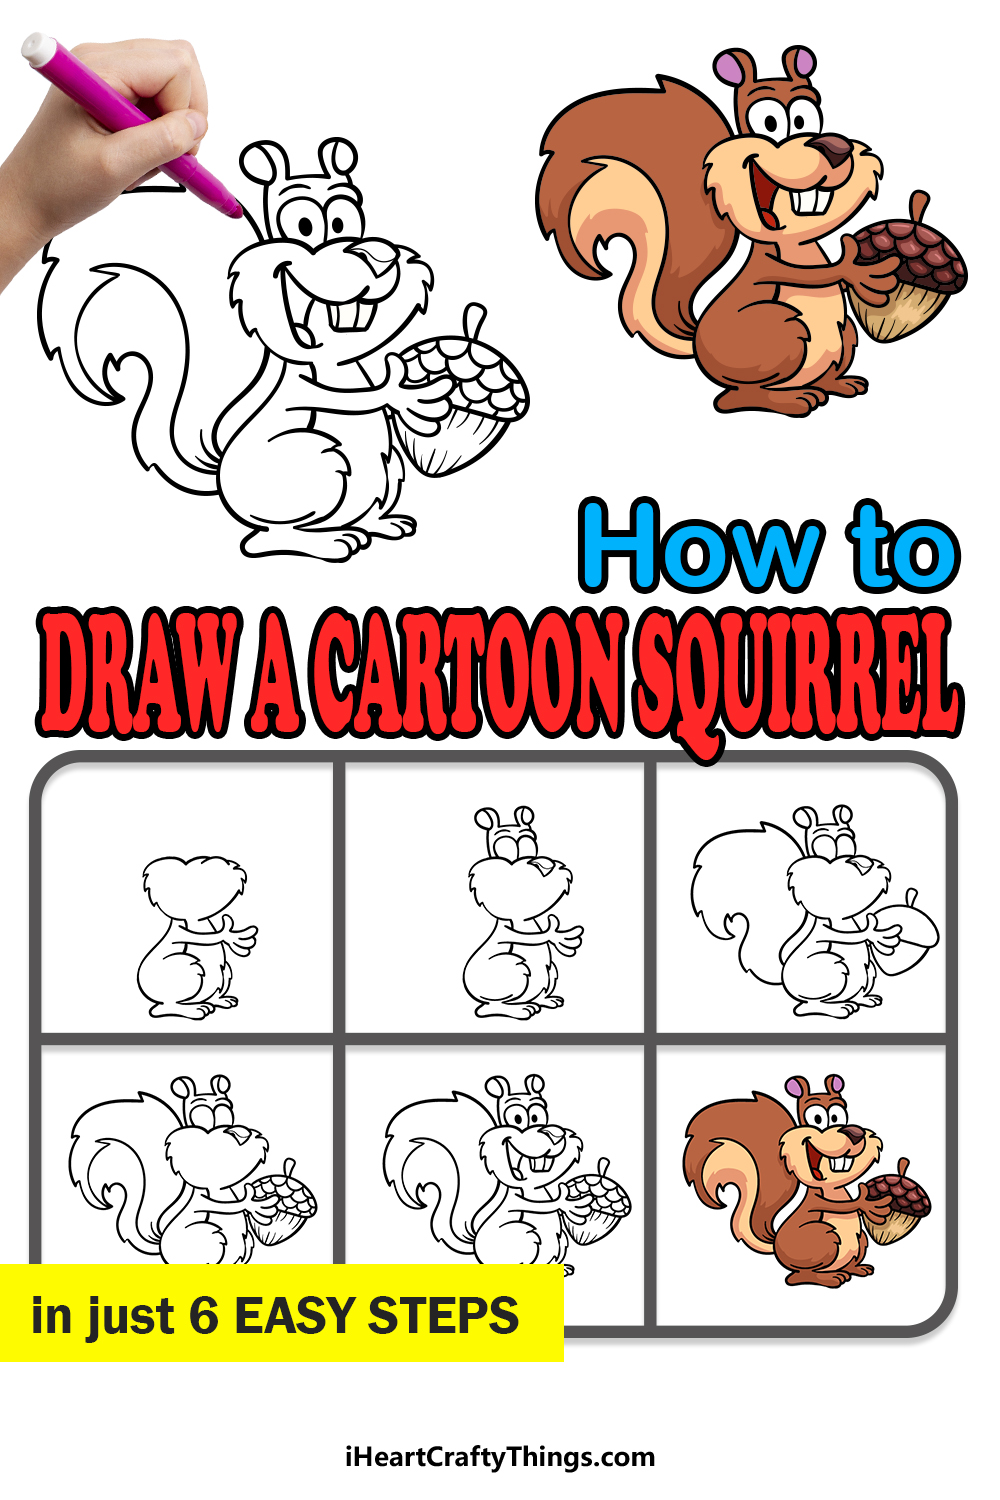 how to draw a cartoon squirrel in 6 easy steps